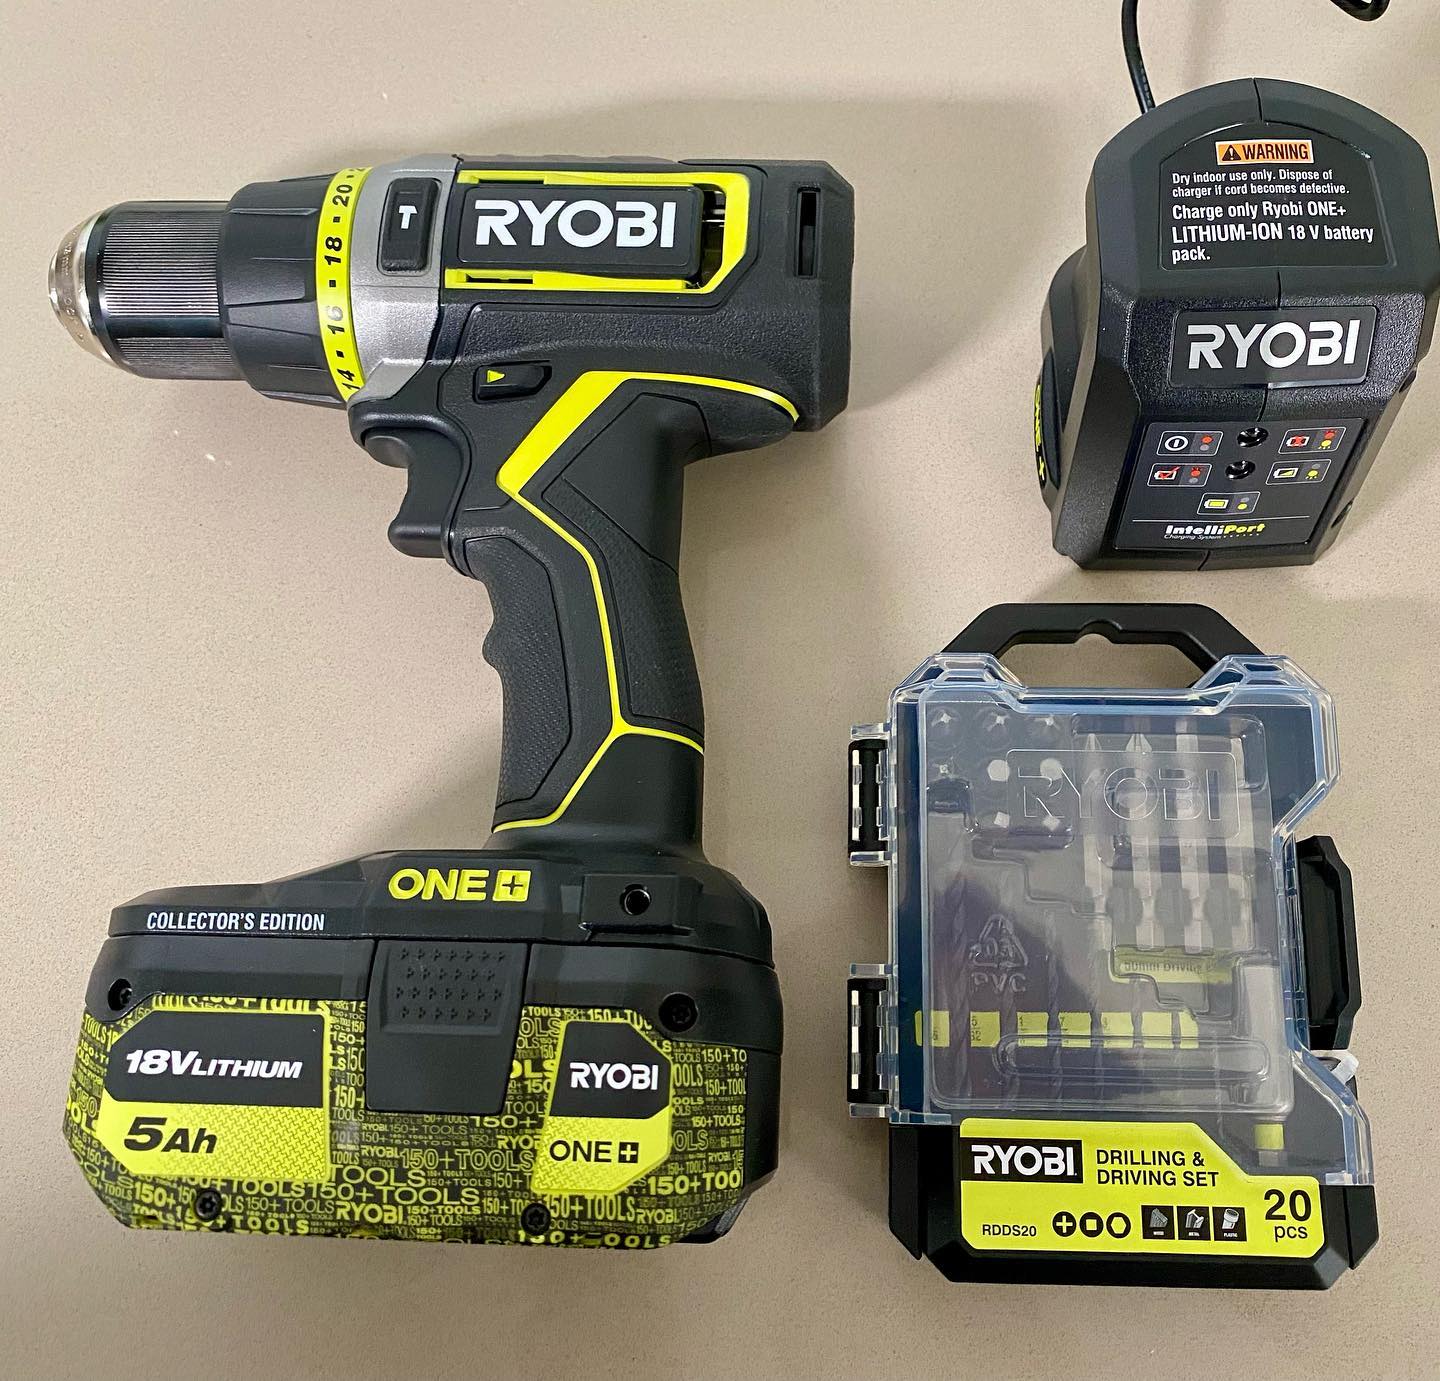 Pleasant surprise to receive the Ryobi 18V ONE+ Hammer drill collector’s edition kit. 

I love the cool design celebrating the release of 150 ONE+ tools in Australia with the hand-painted hyper-green lightning stripes and an impressive hand-dipped 150th tool graphic. 

I got serial no. 00003.

Thanks ryobiau 

#gifted #ryobimade #ryobipowertools #collector